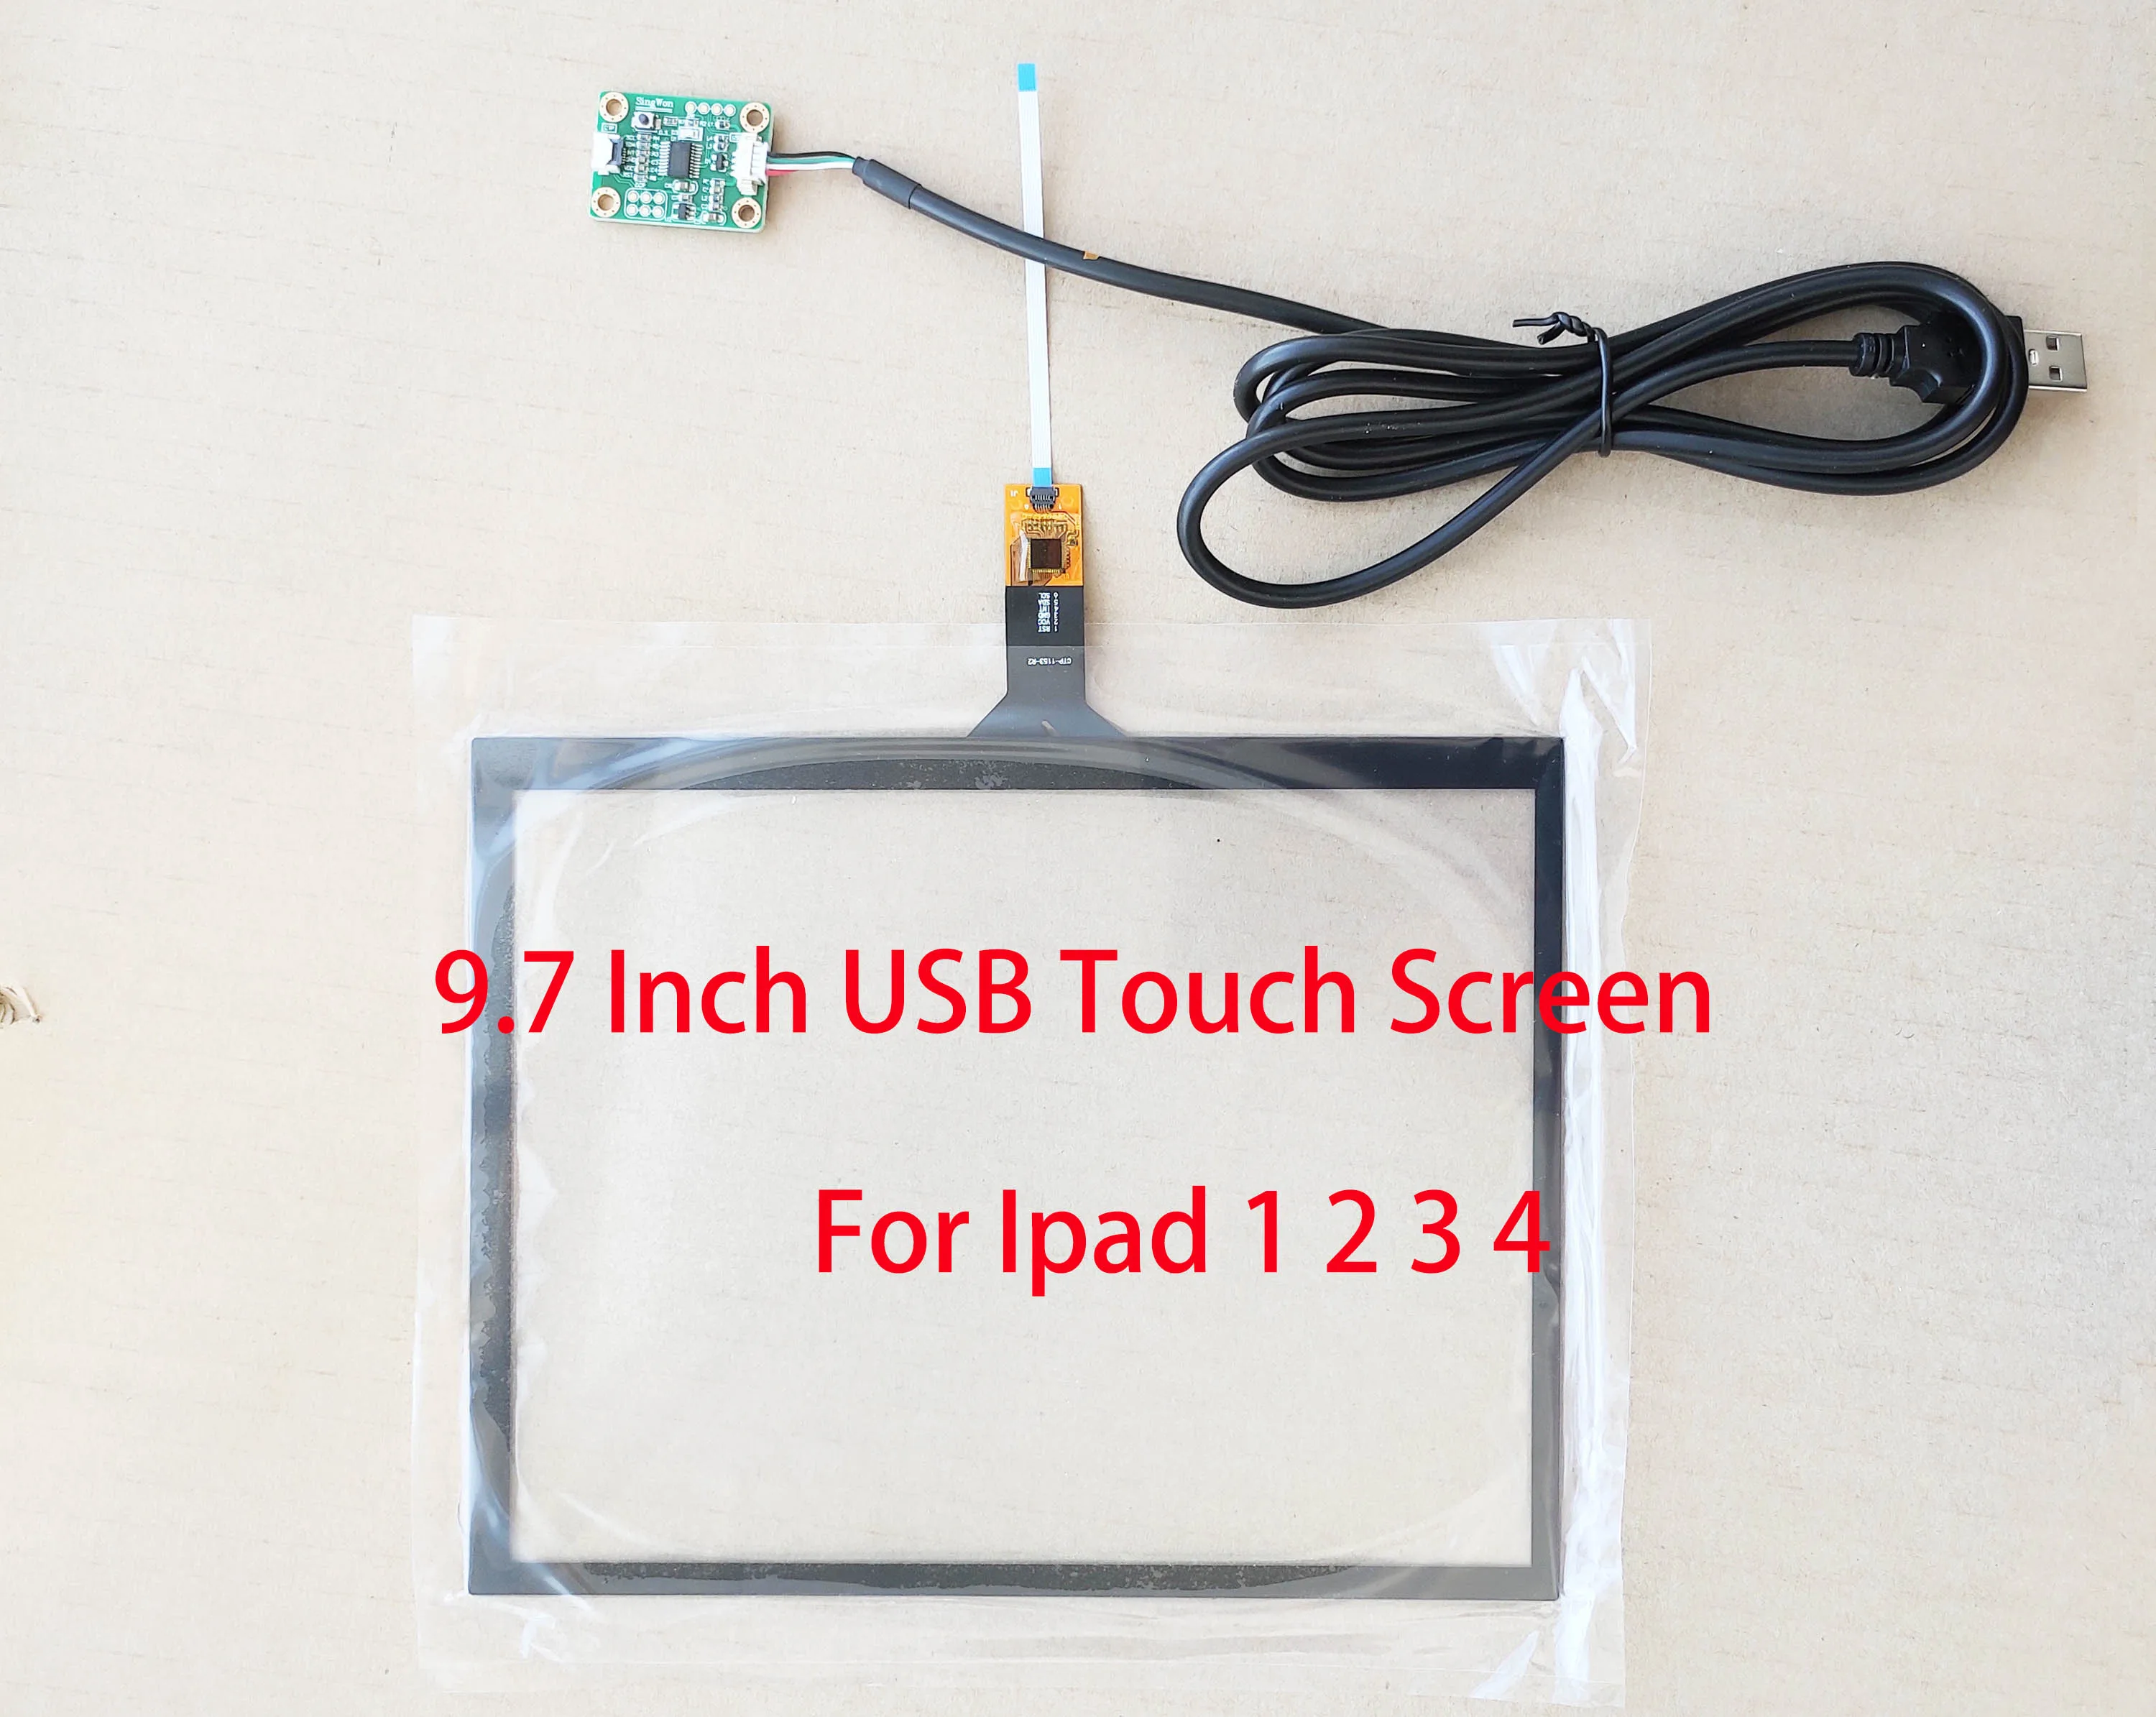 

9.7 Inch USB Touch Screen Digitizer Sensor For LCD DIY IPAD 1/3/4/5/6 1024*768 1536*2048 Support Win7 8 10 Raspberry Pi